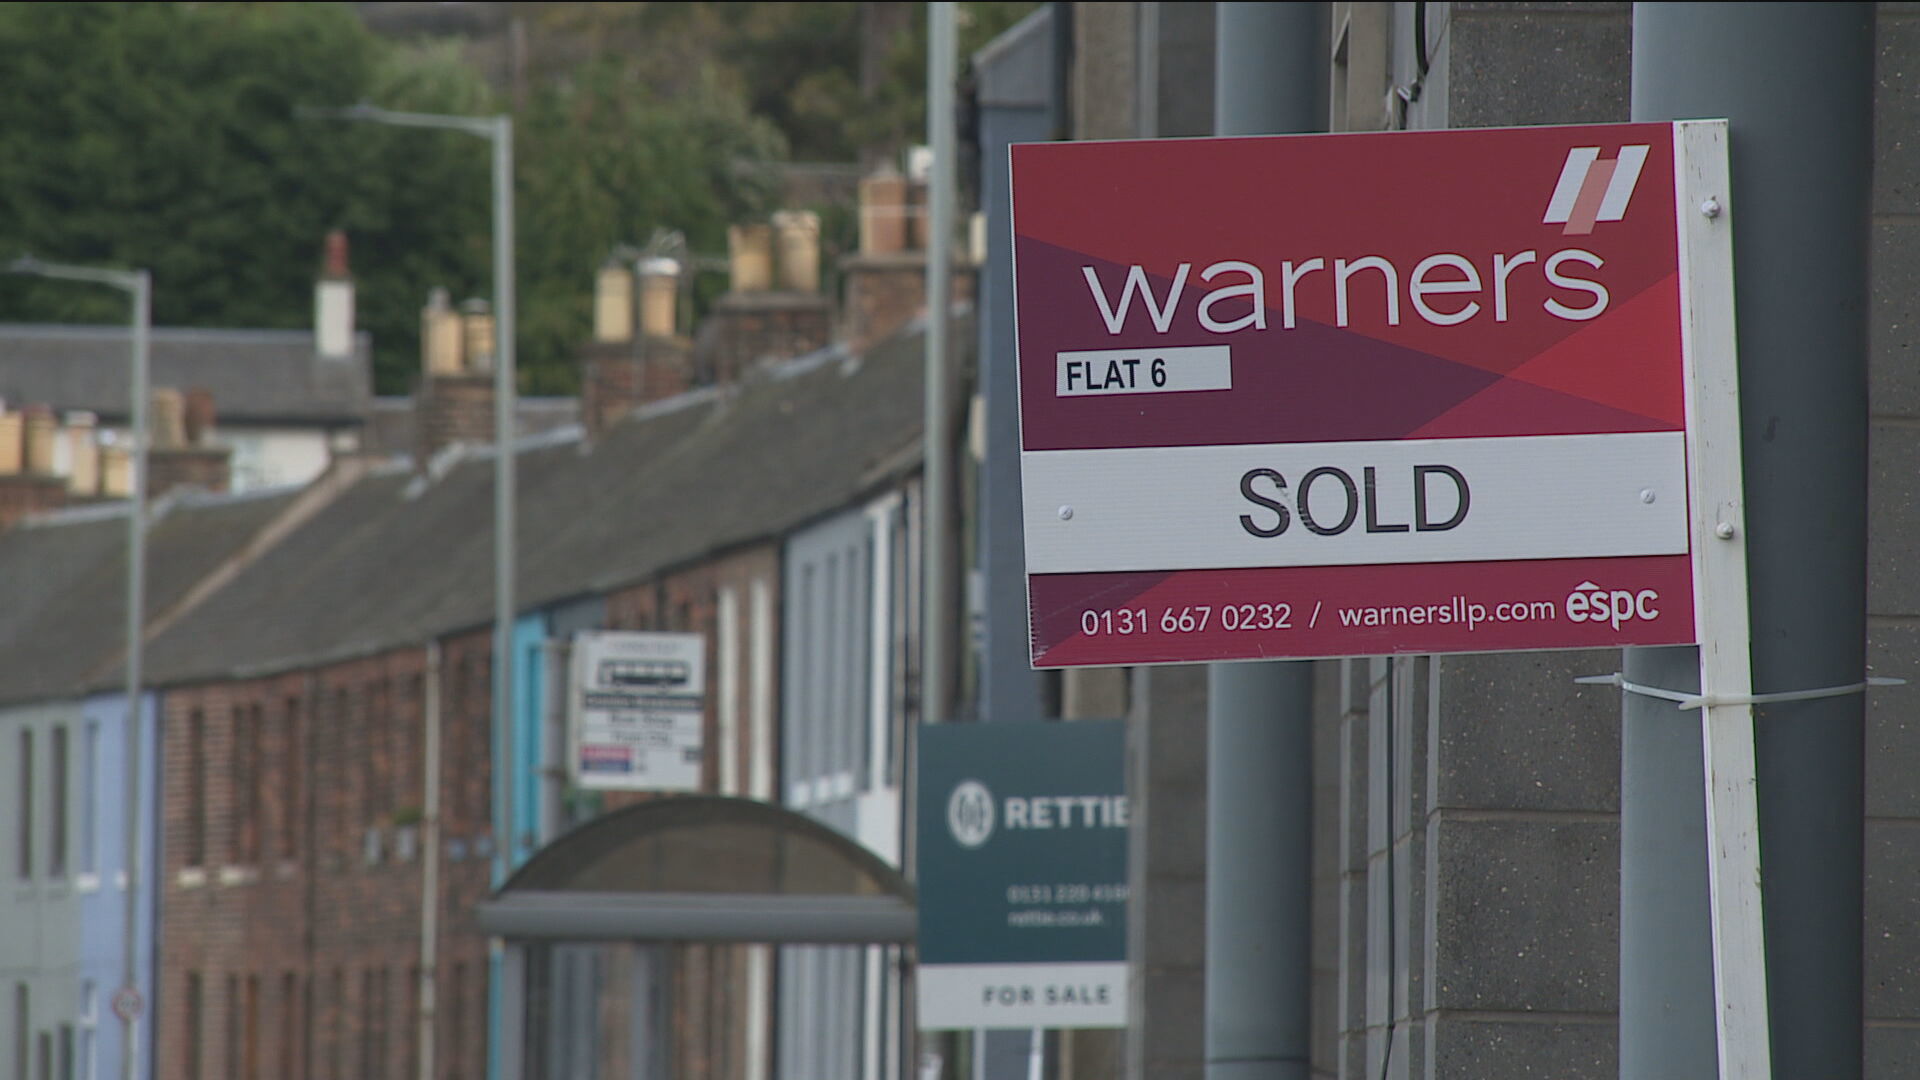 Private landlords have warned they may be forced to sell their homes as mortgages increase.